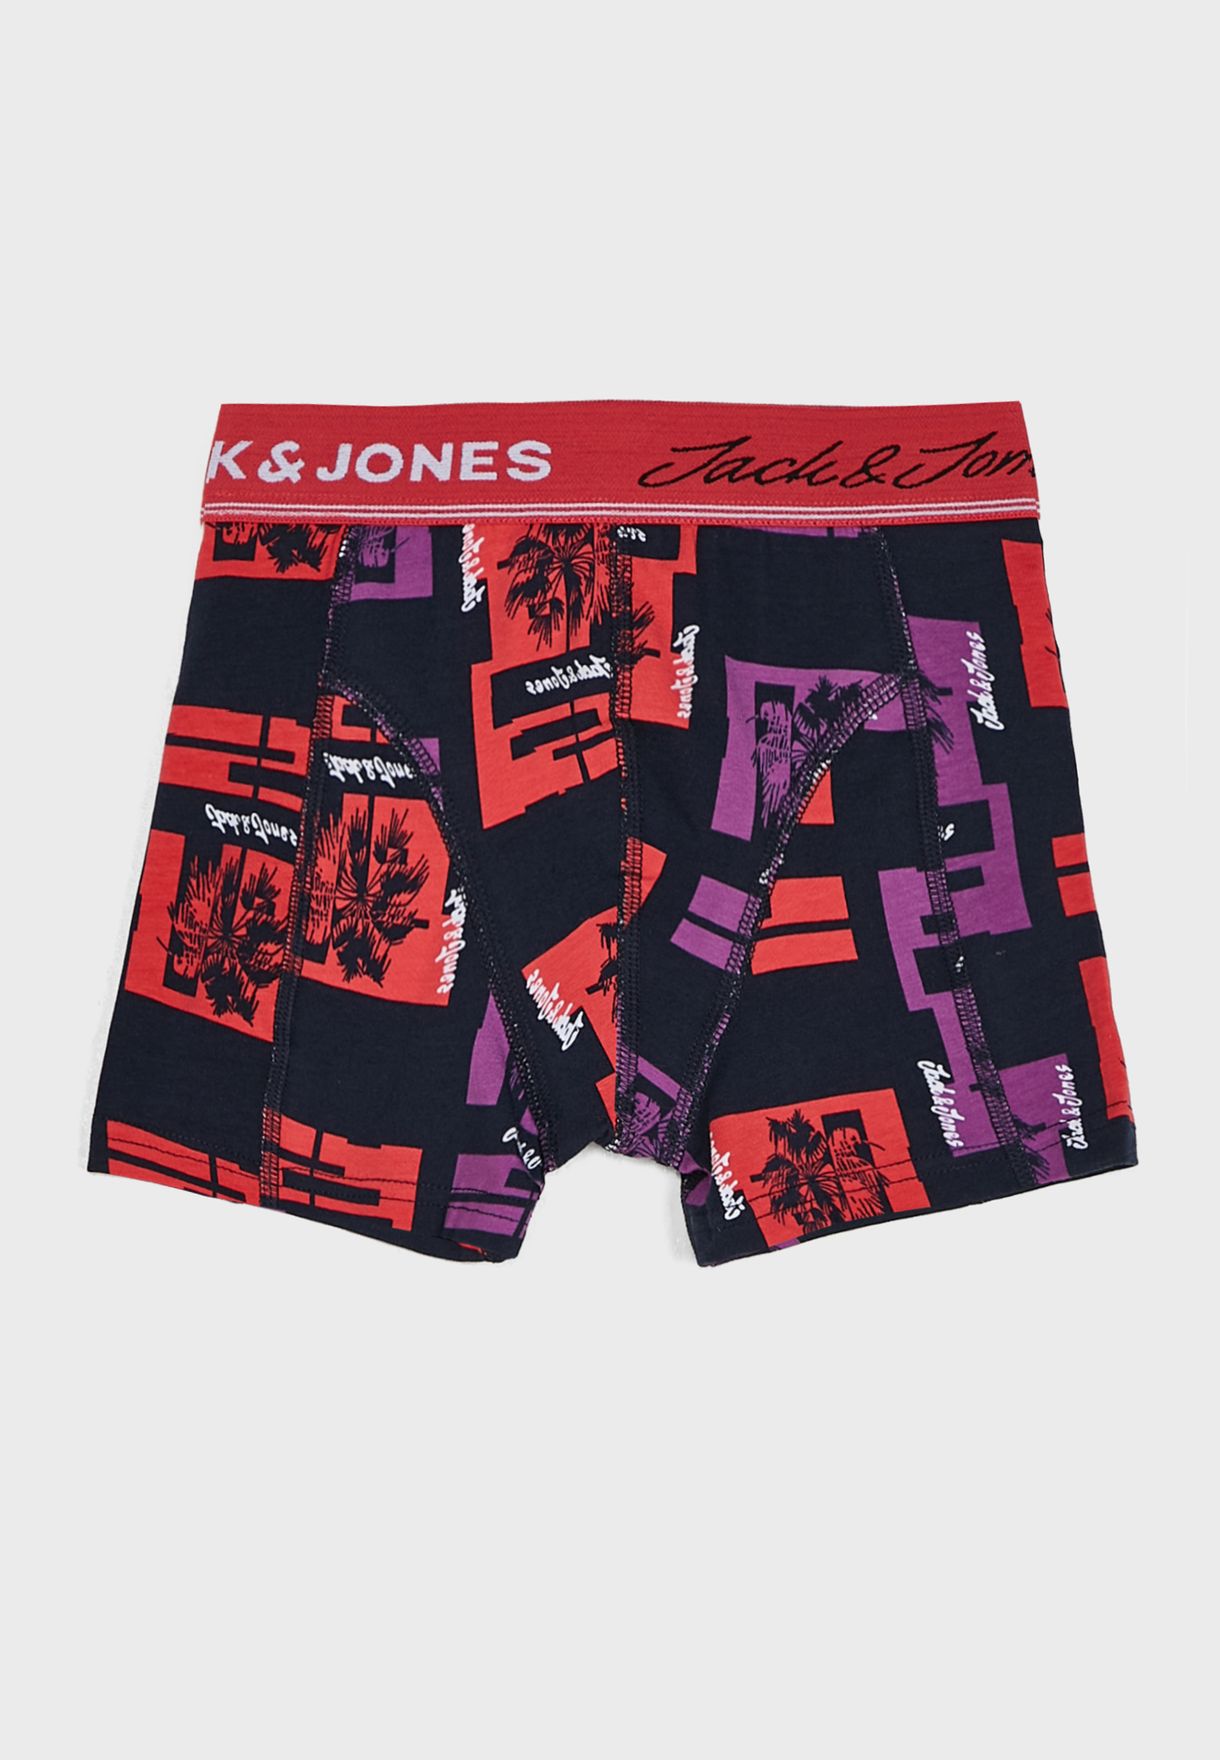 Youth 3 Pack Assorted Trunks